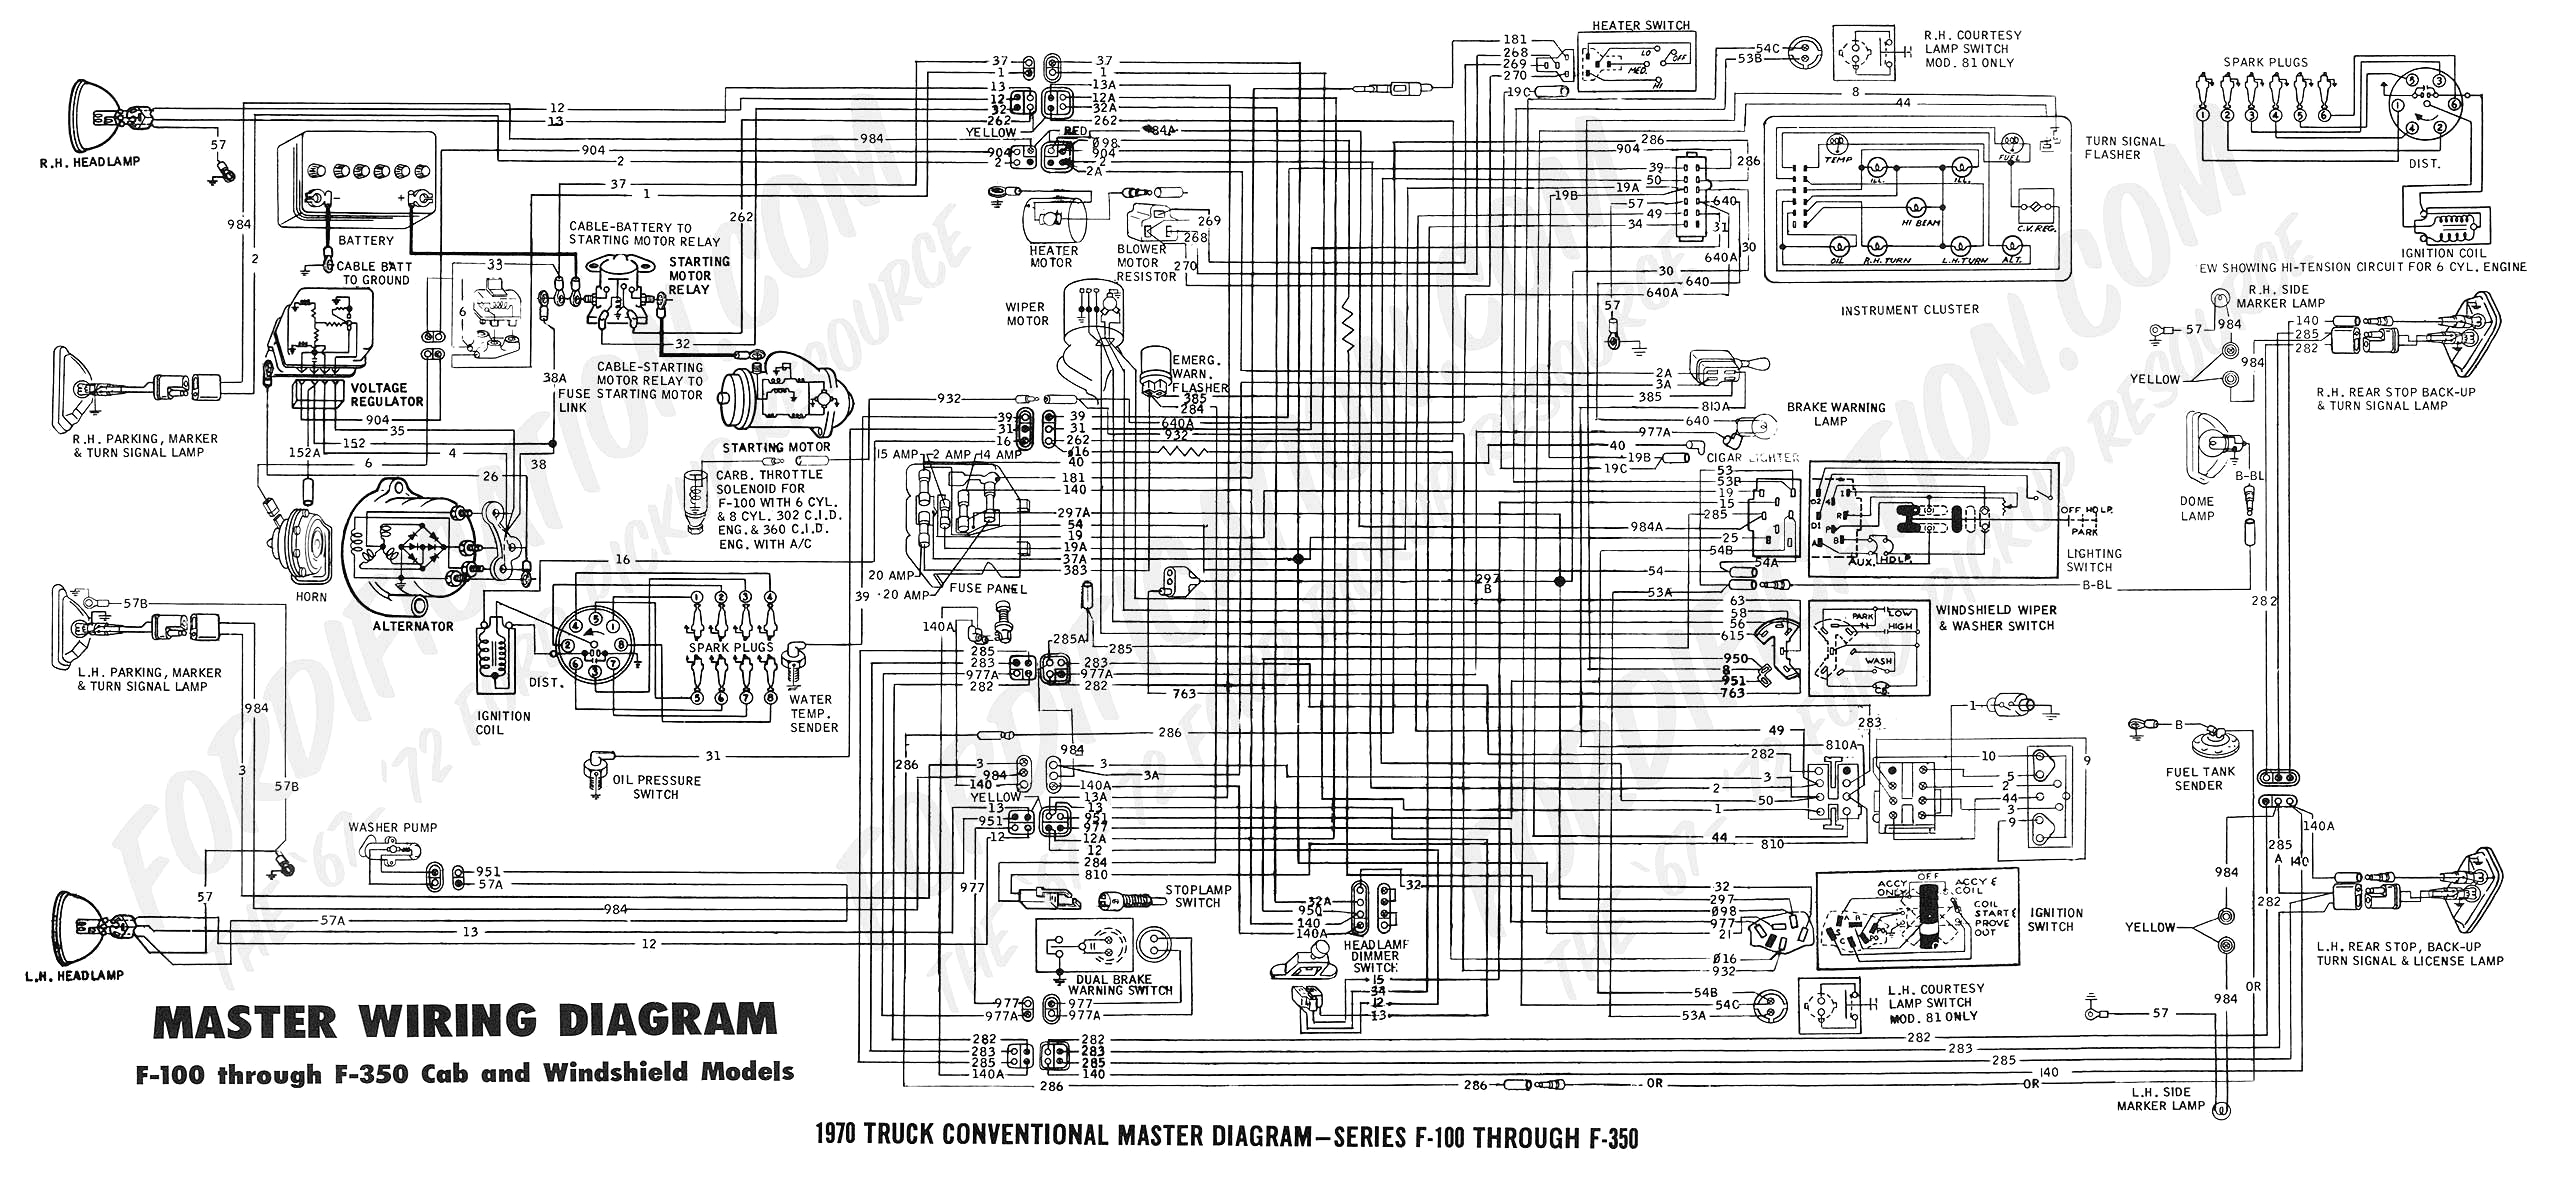 86 ford f250 wiring diagram wiring diagrams for wiring diagram for 1968 ford f250 86 ford